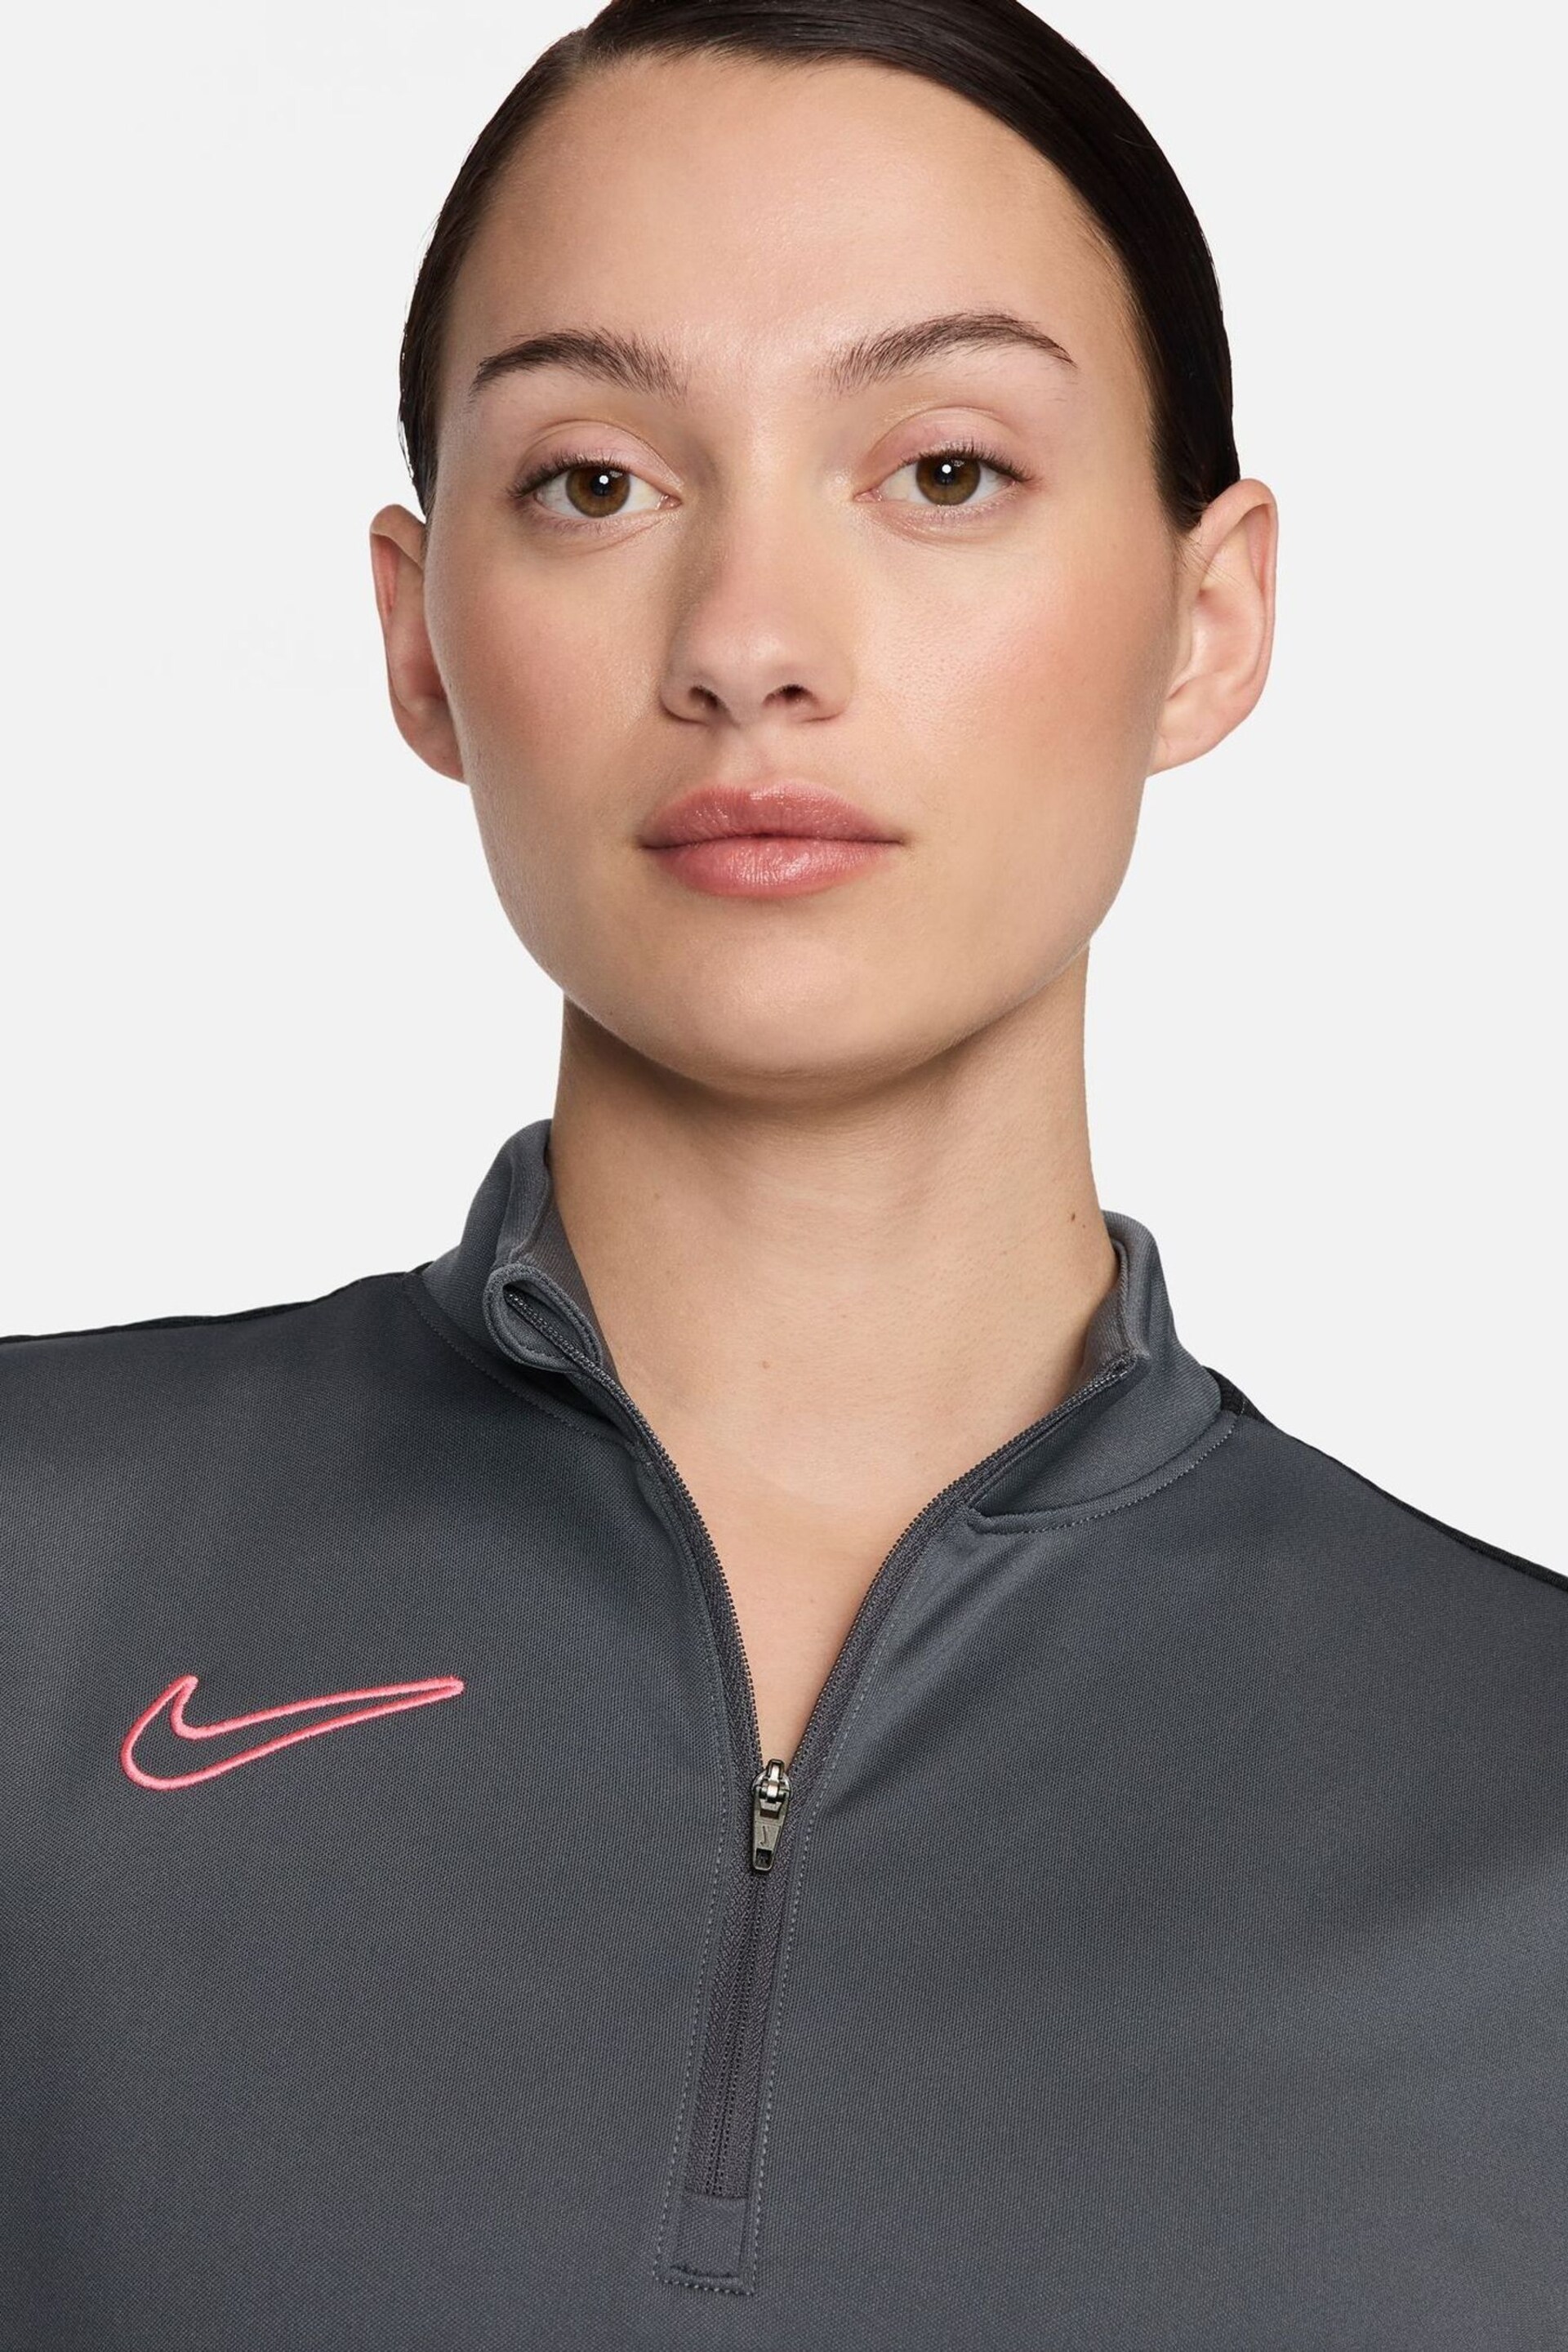 Nike Black Dri-FIT Academy Drill Training Top - Image 5 of 8